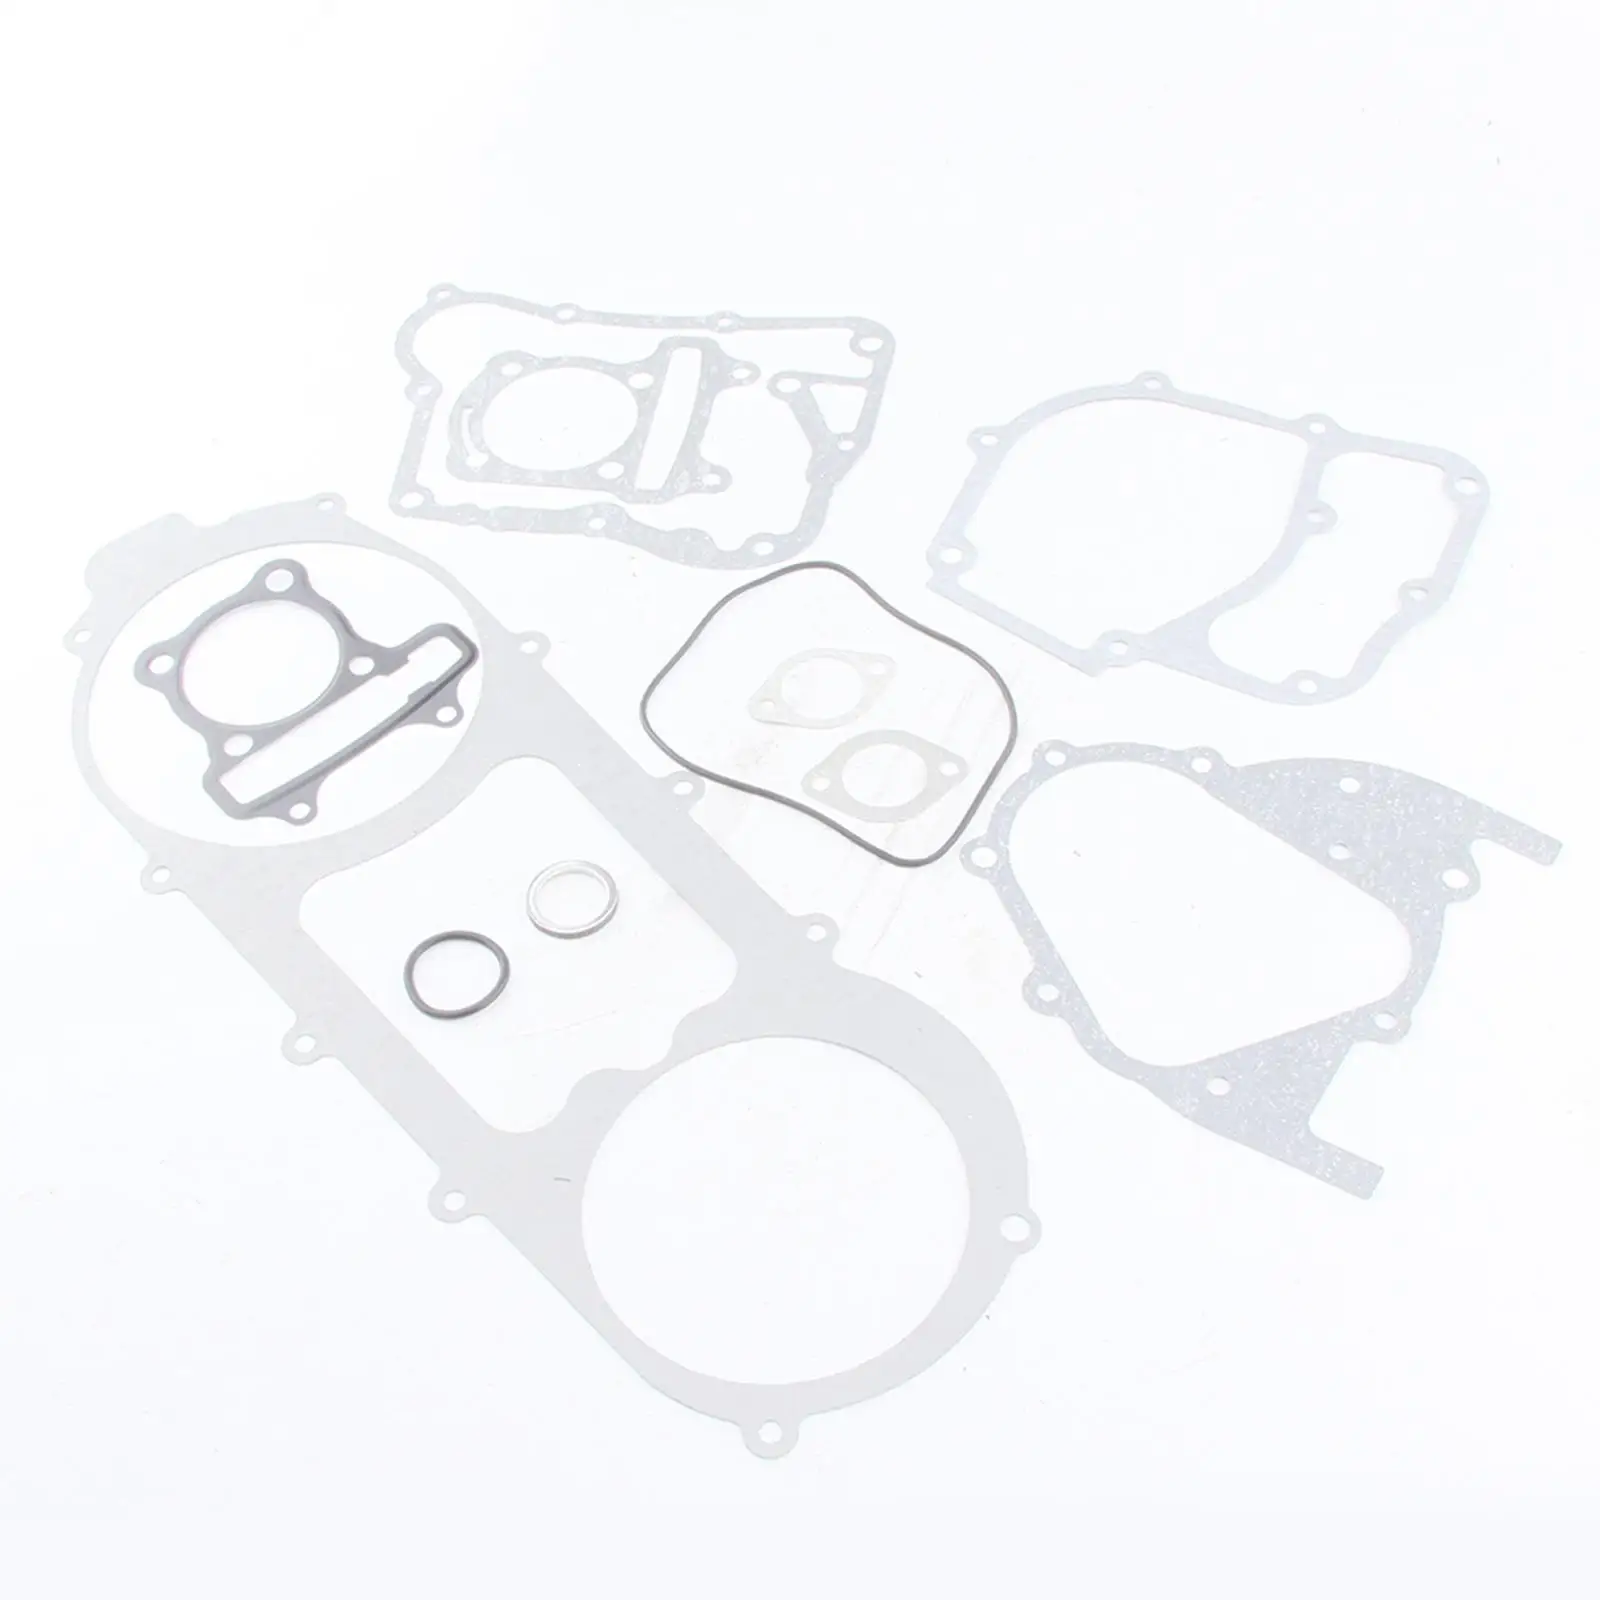 NEW Engine Head Gasket Set for GY6 150cc Moped Scooter Go Karts Quad